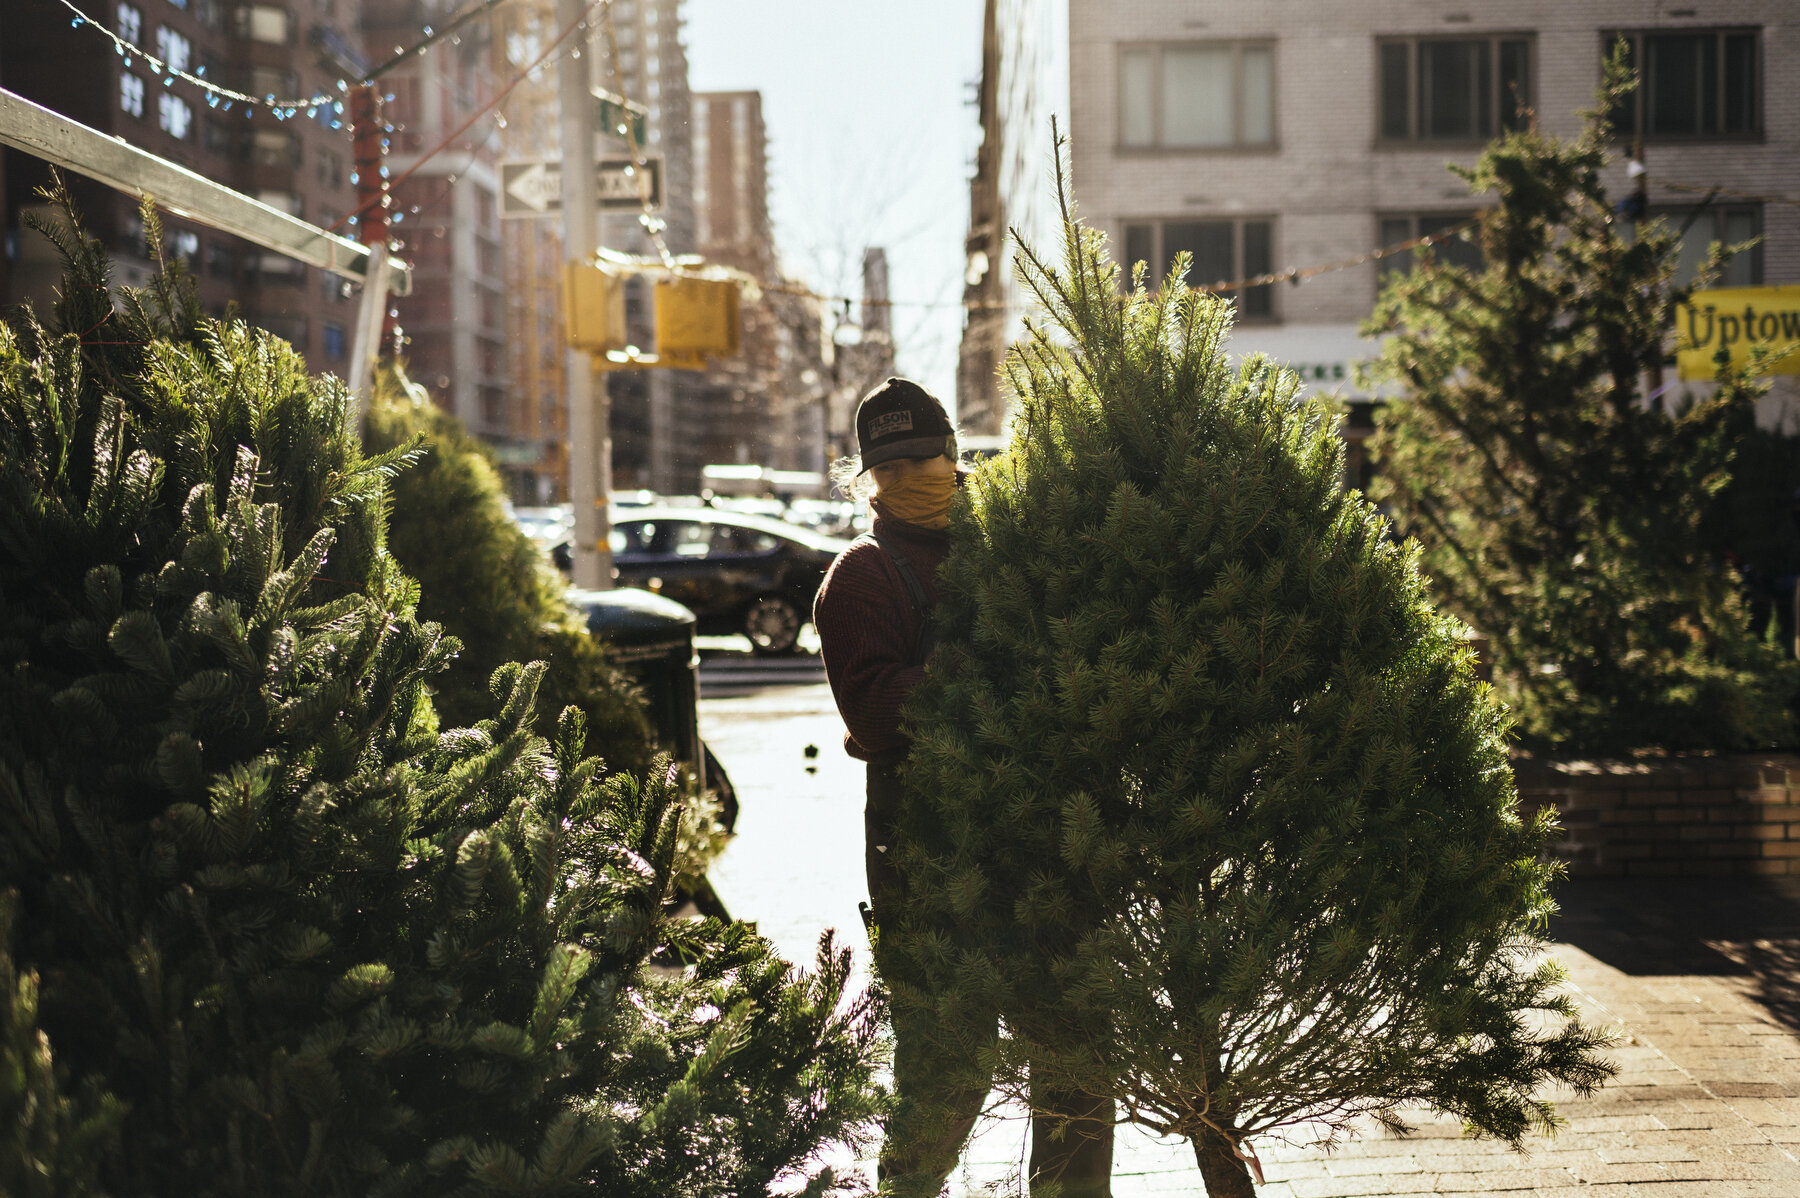  Emily Mullen, a Christmas tree merchant for Uptown Christmas Trees, moves trees to display them for passing customers. 